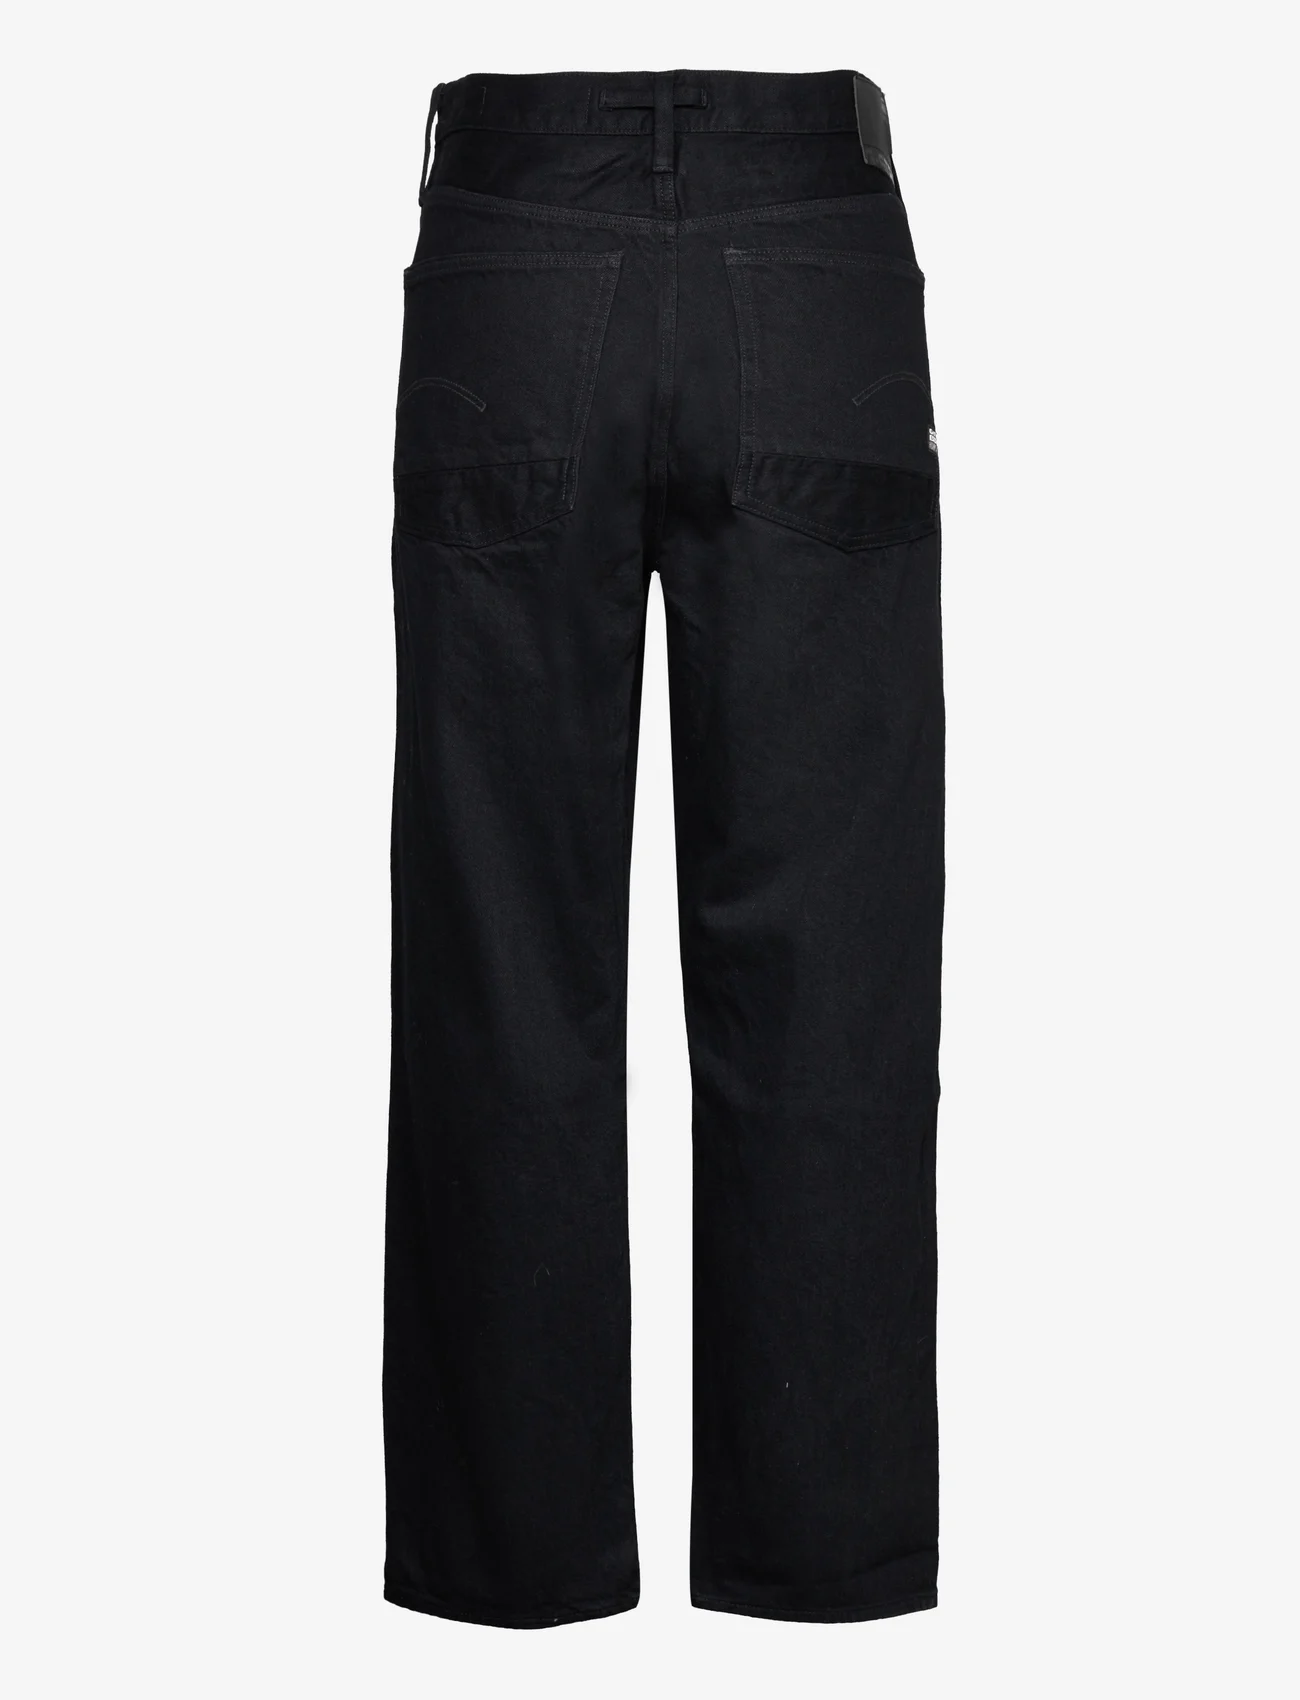 G-Star RAW - Type 89 Loose - brede jeans - pitch black - 1